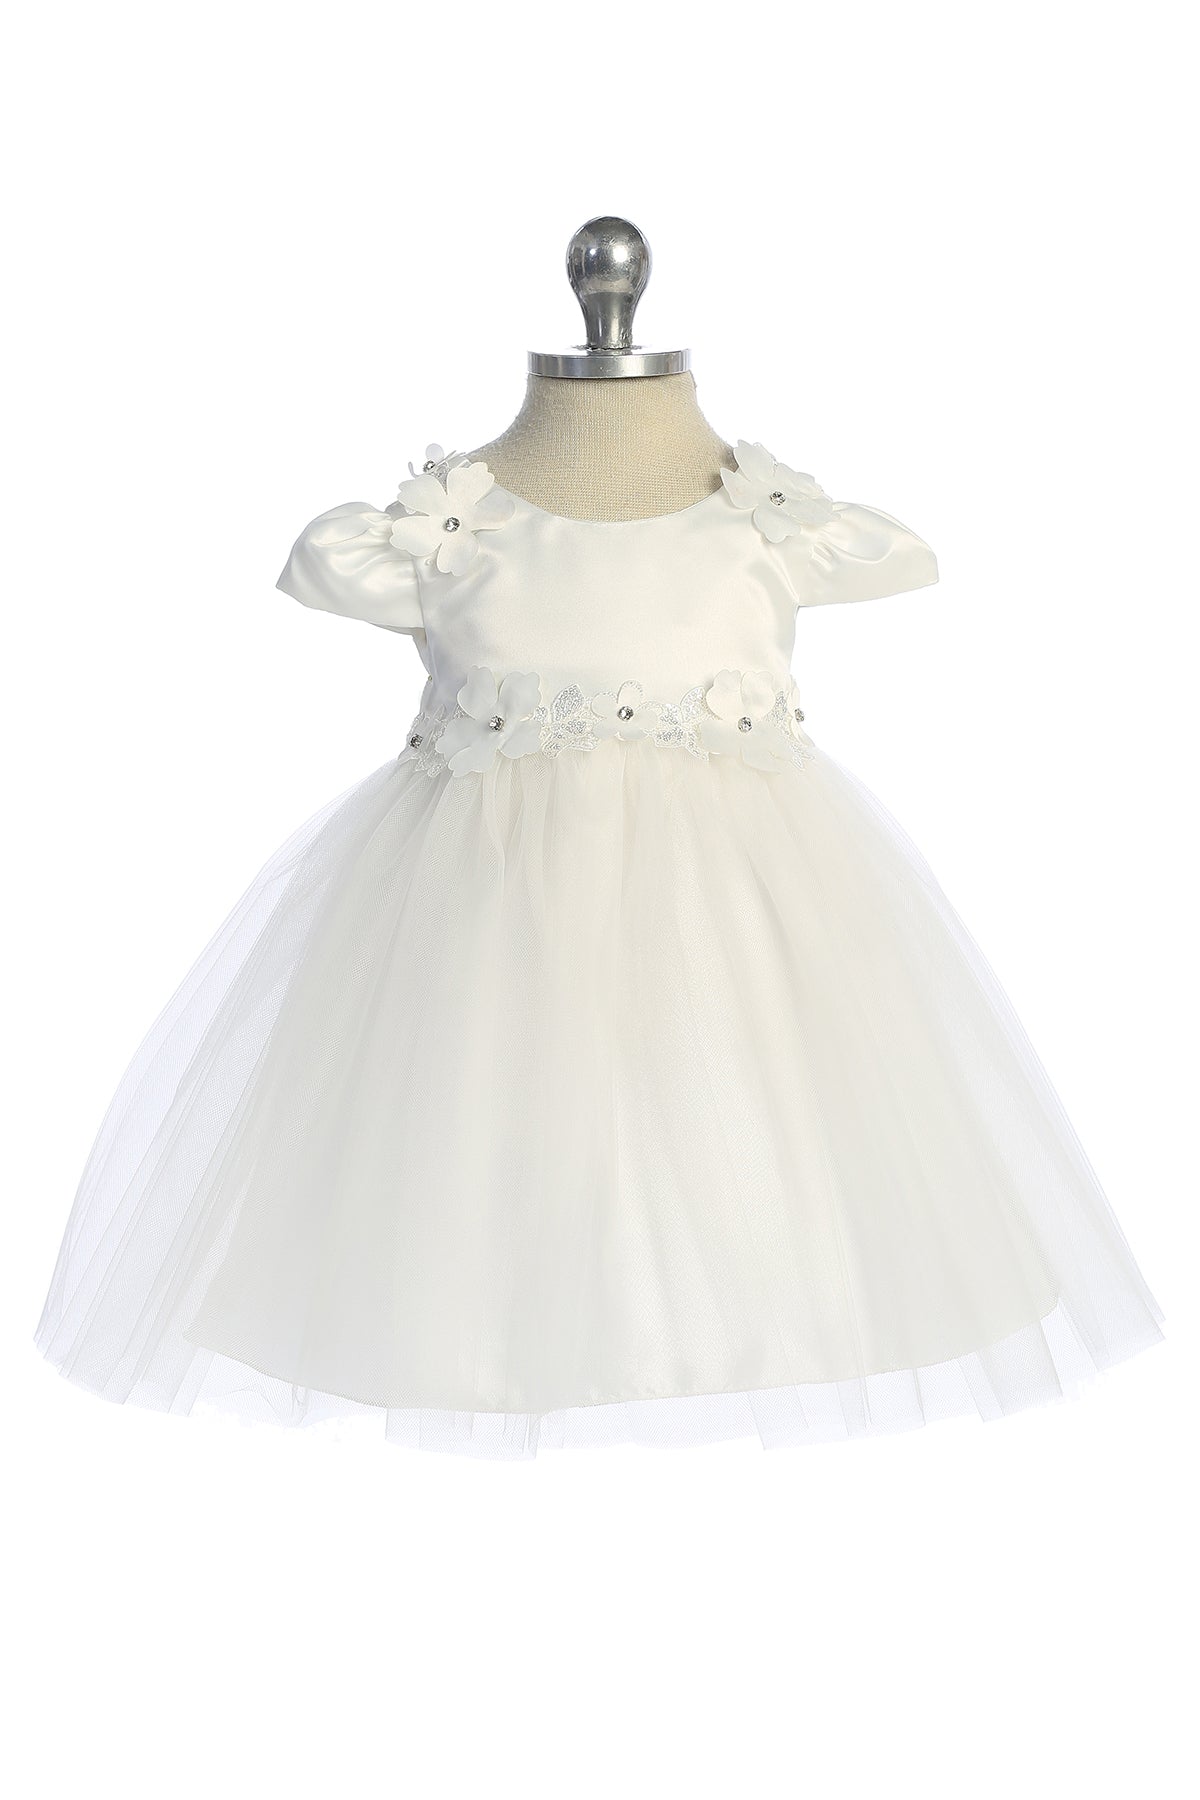 562B Capped Sleeve Satin & Tulle Baby Dress with Floral Trim